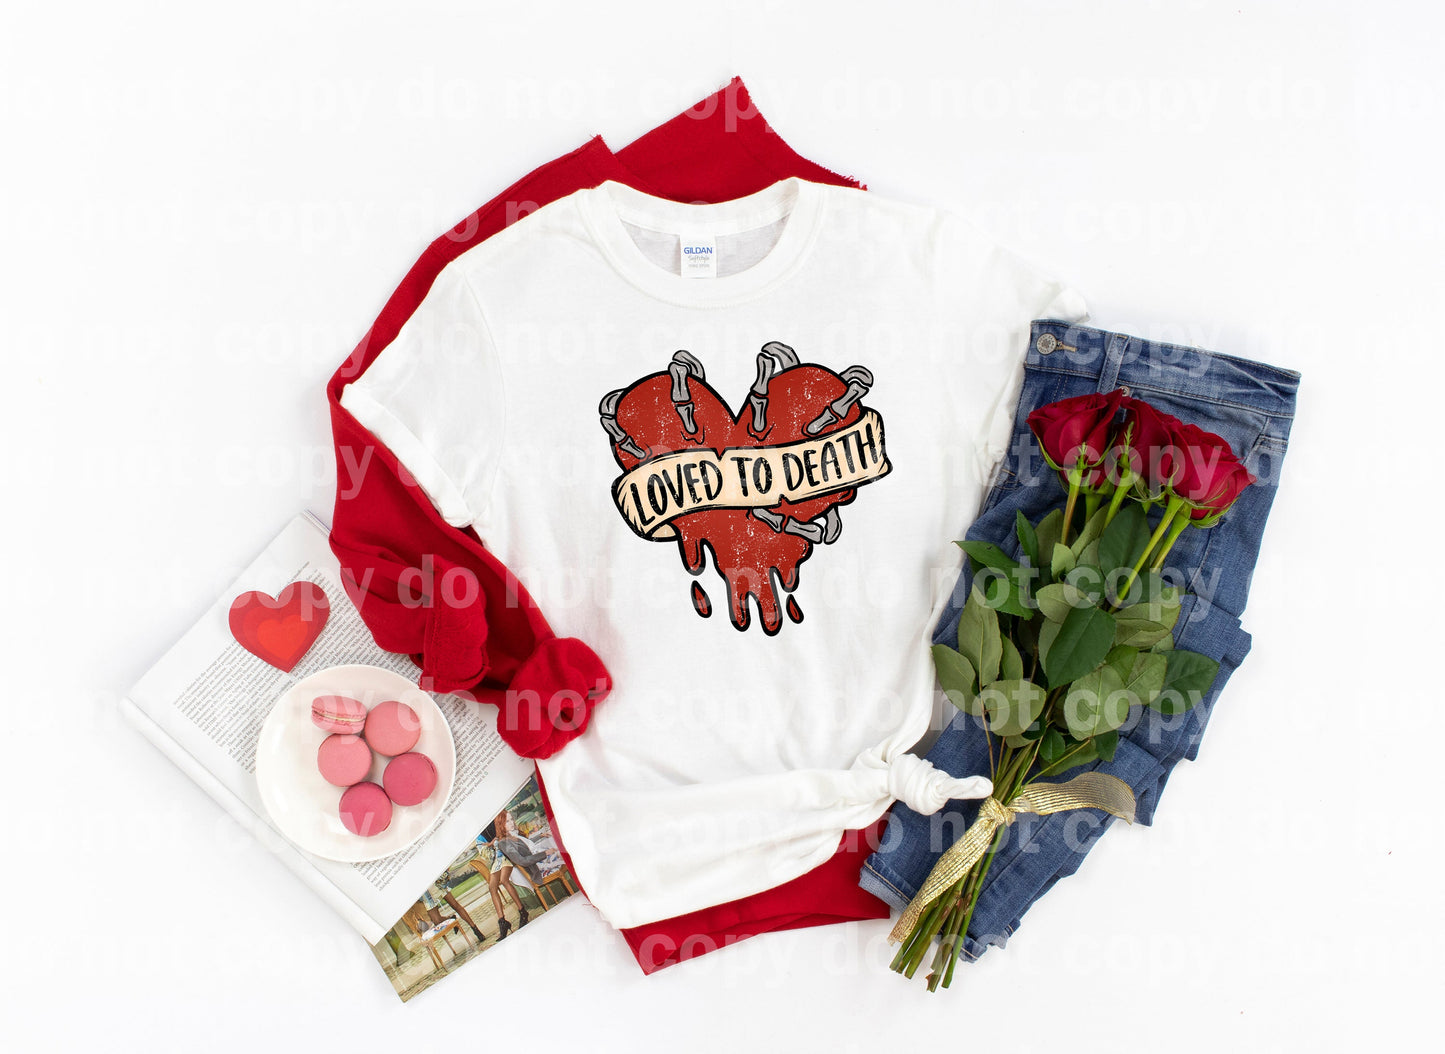 Loved To Death Distressed Full Color/One Color Dream Print or Sublimation Print